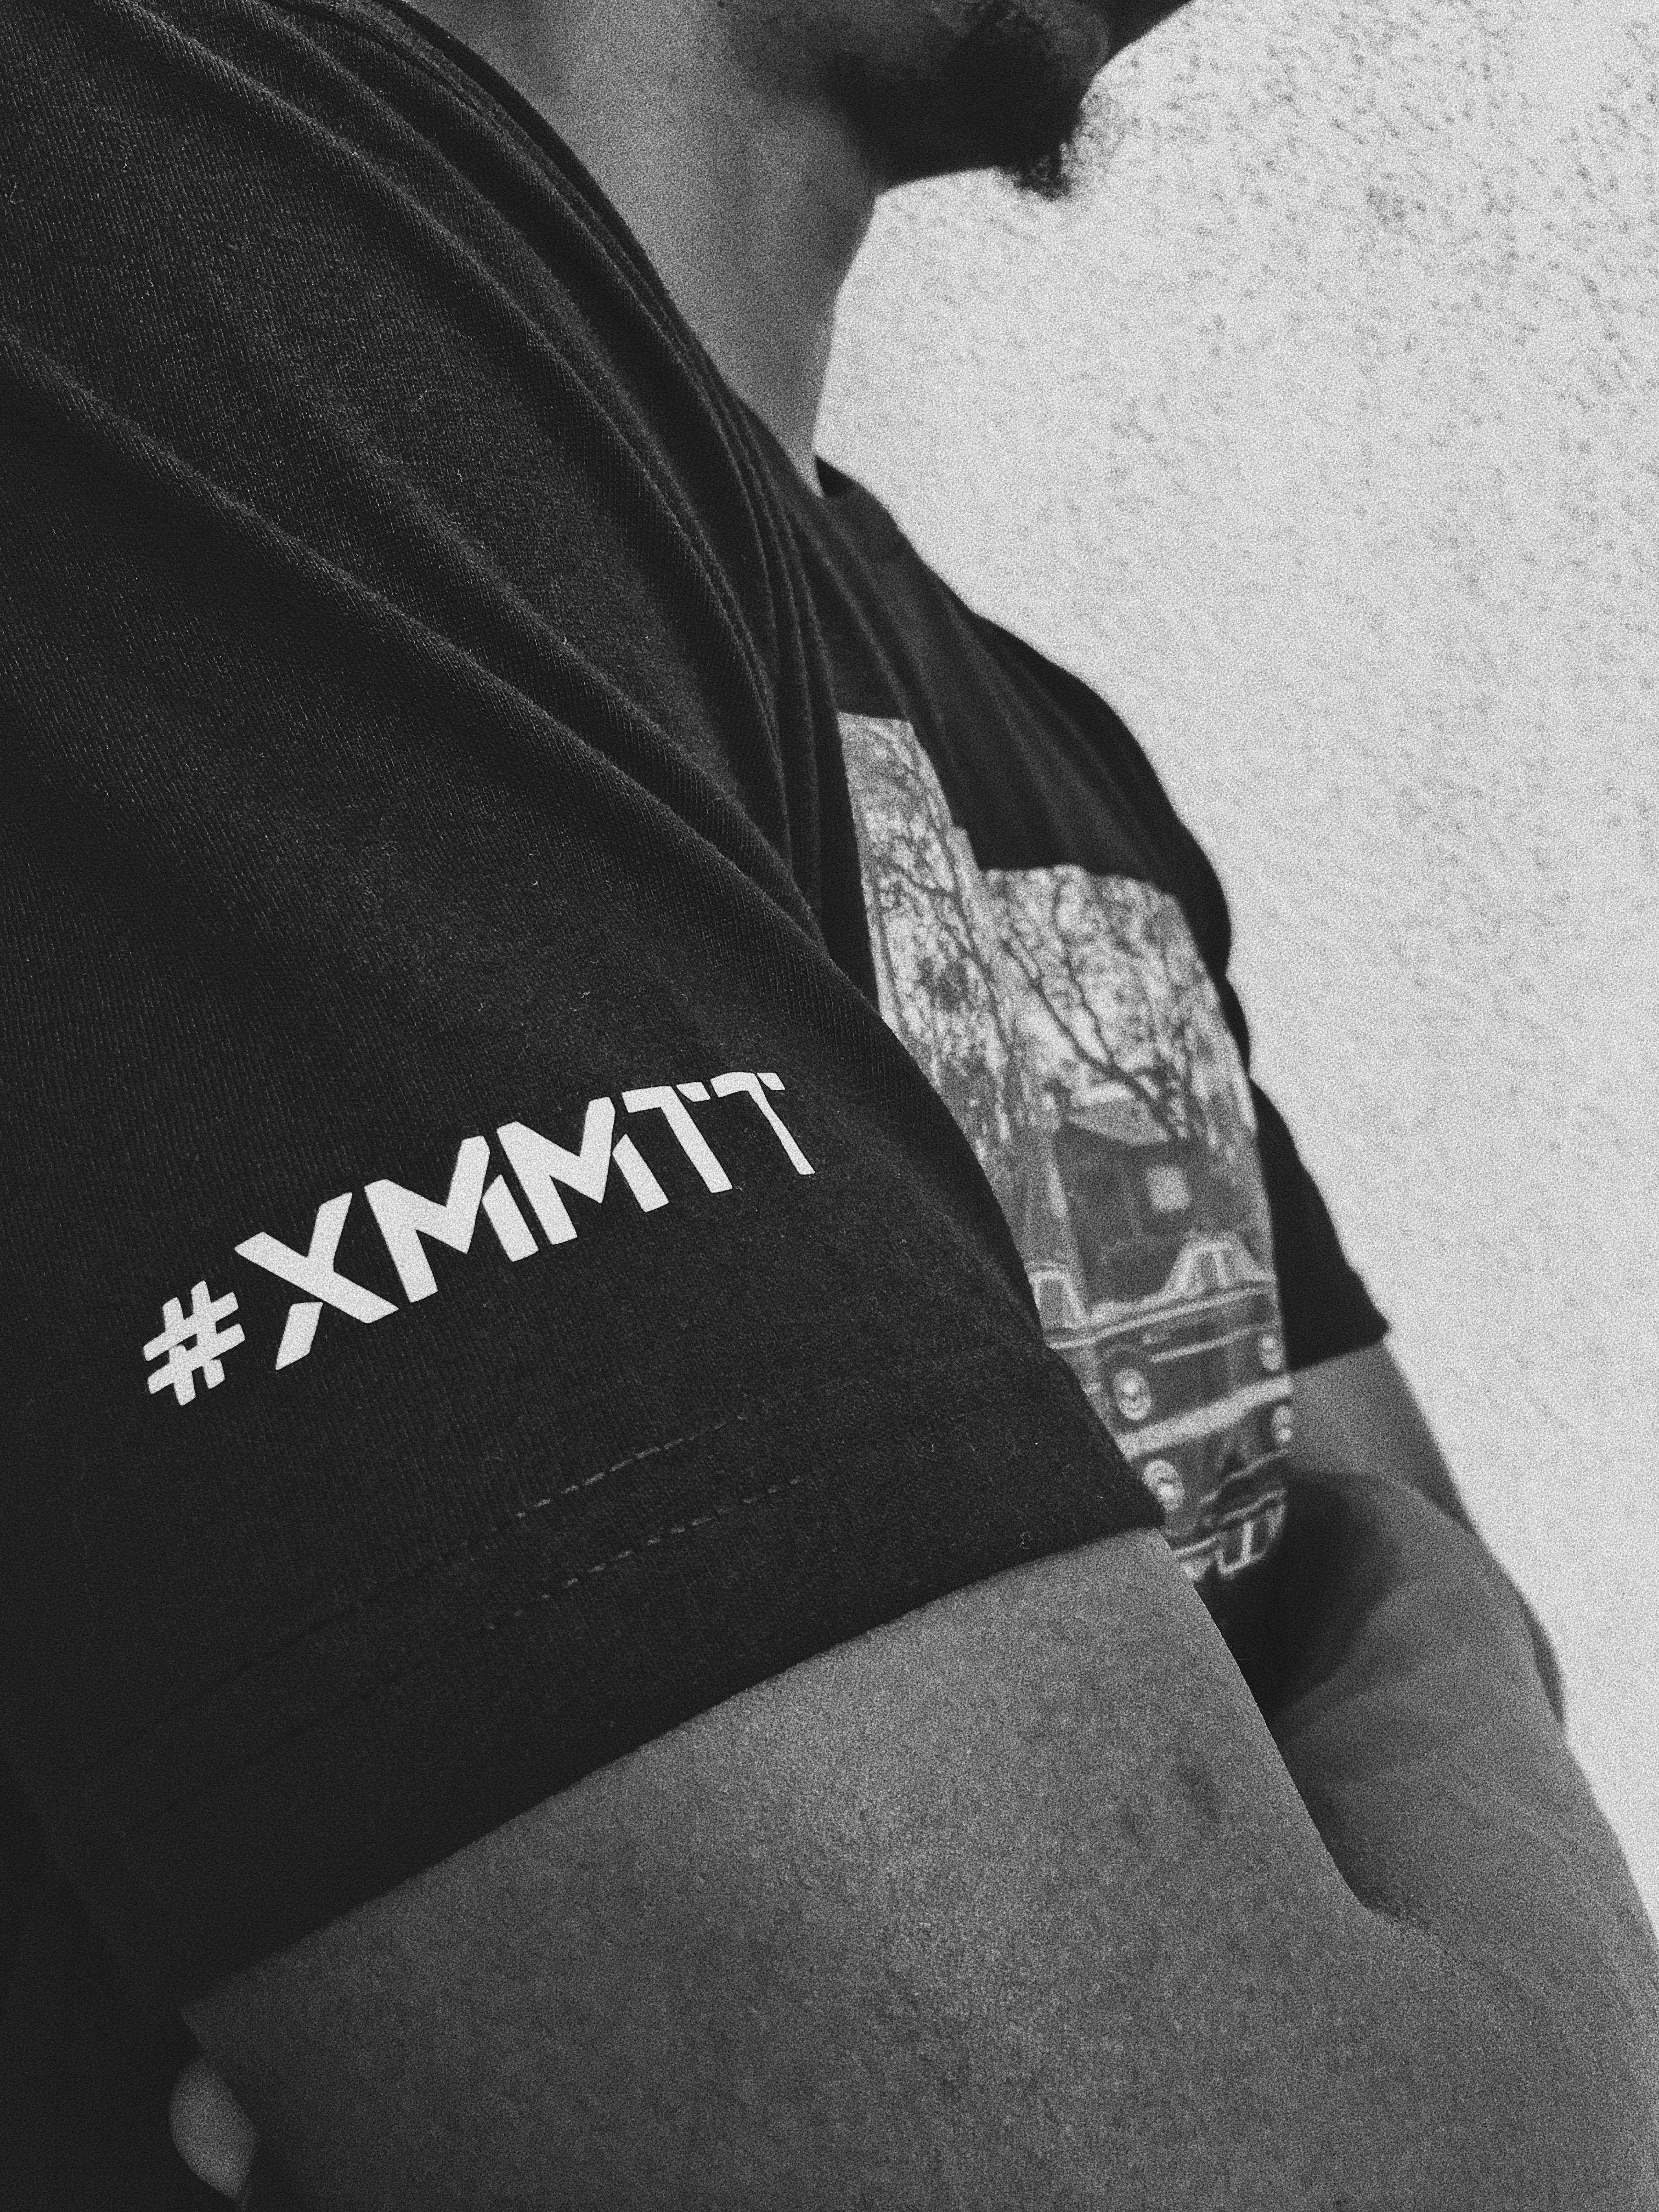 personalized graphic tee-xmmtt-long beach graphix